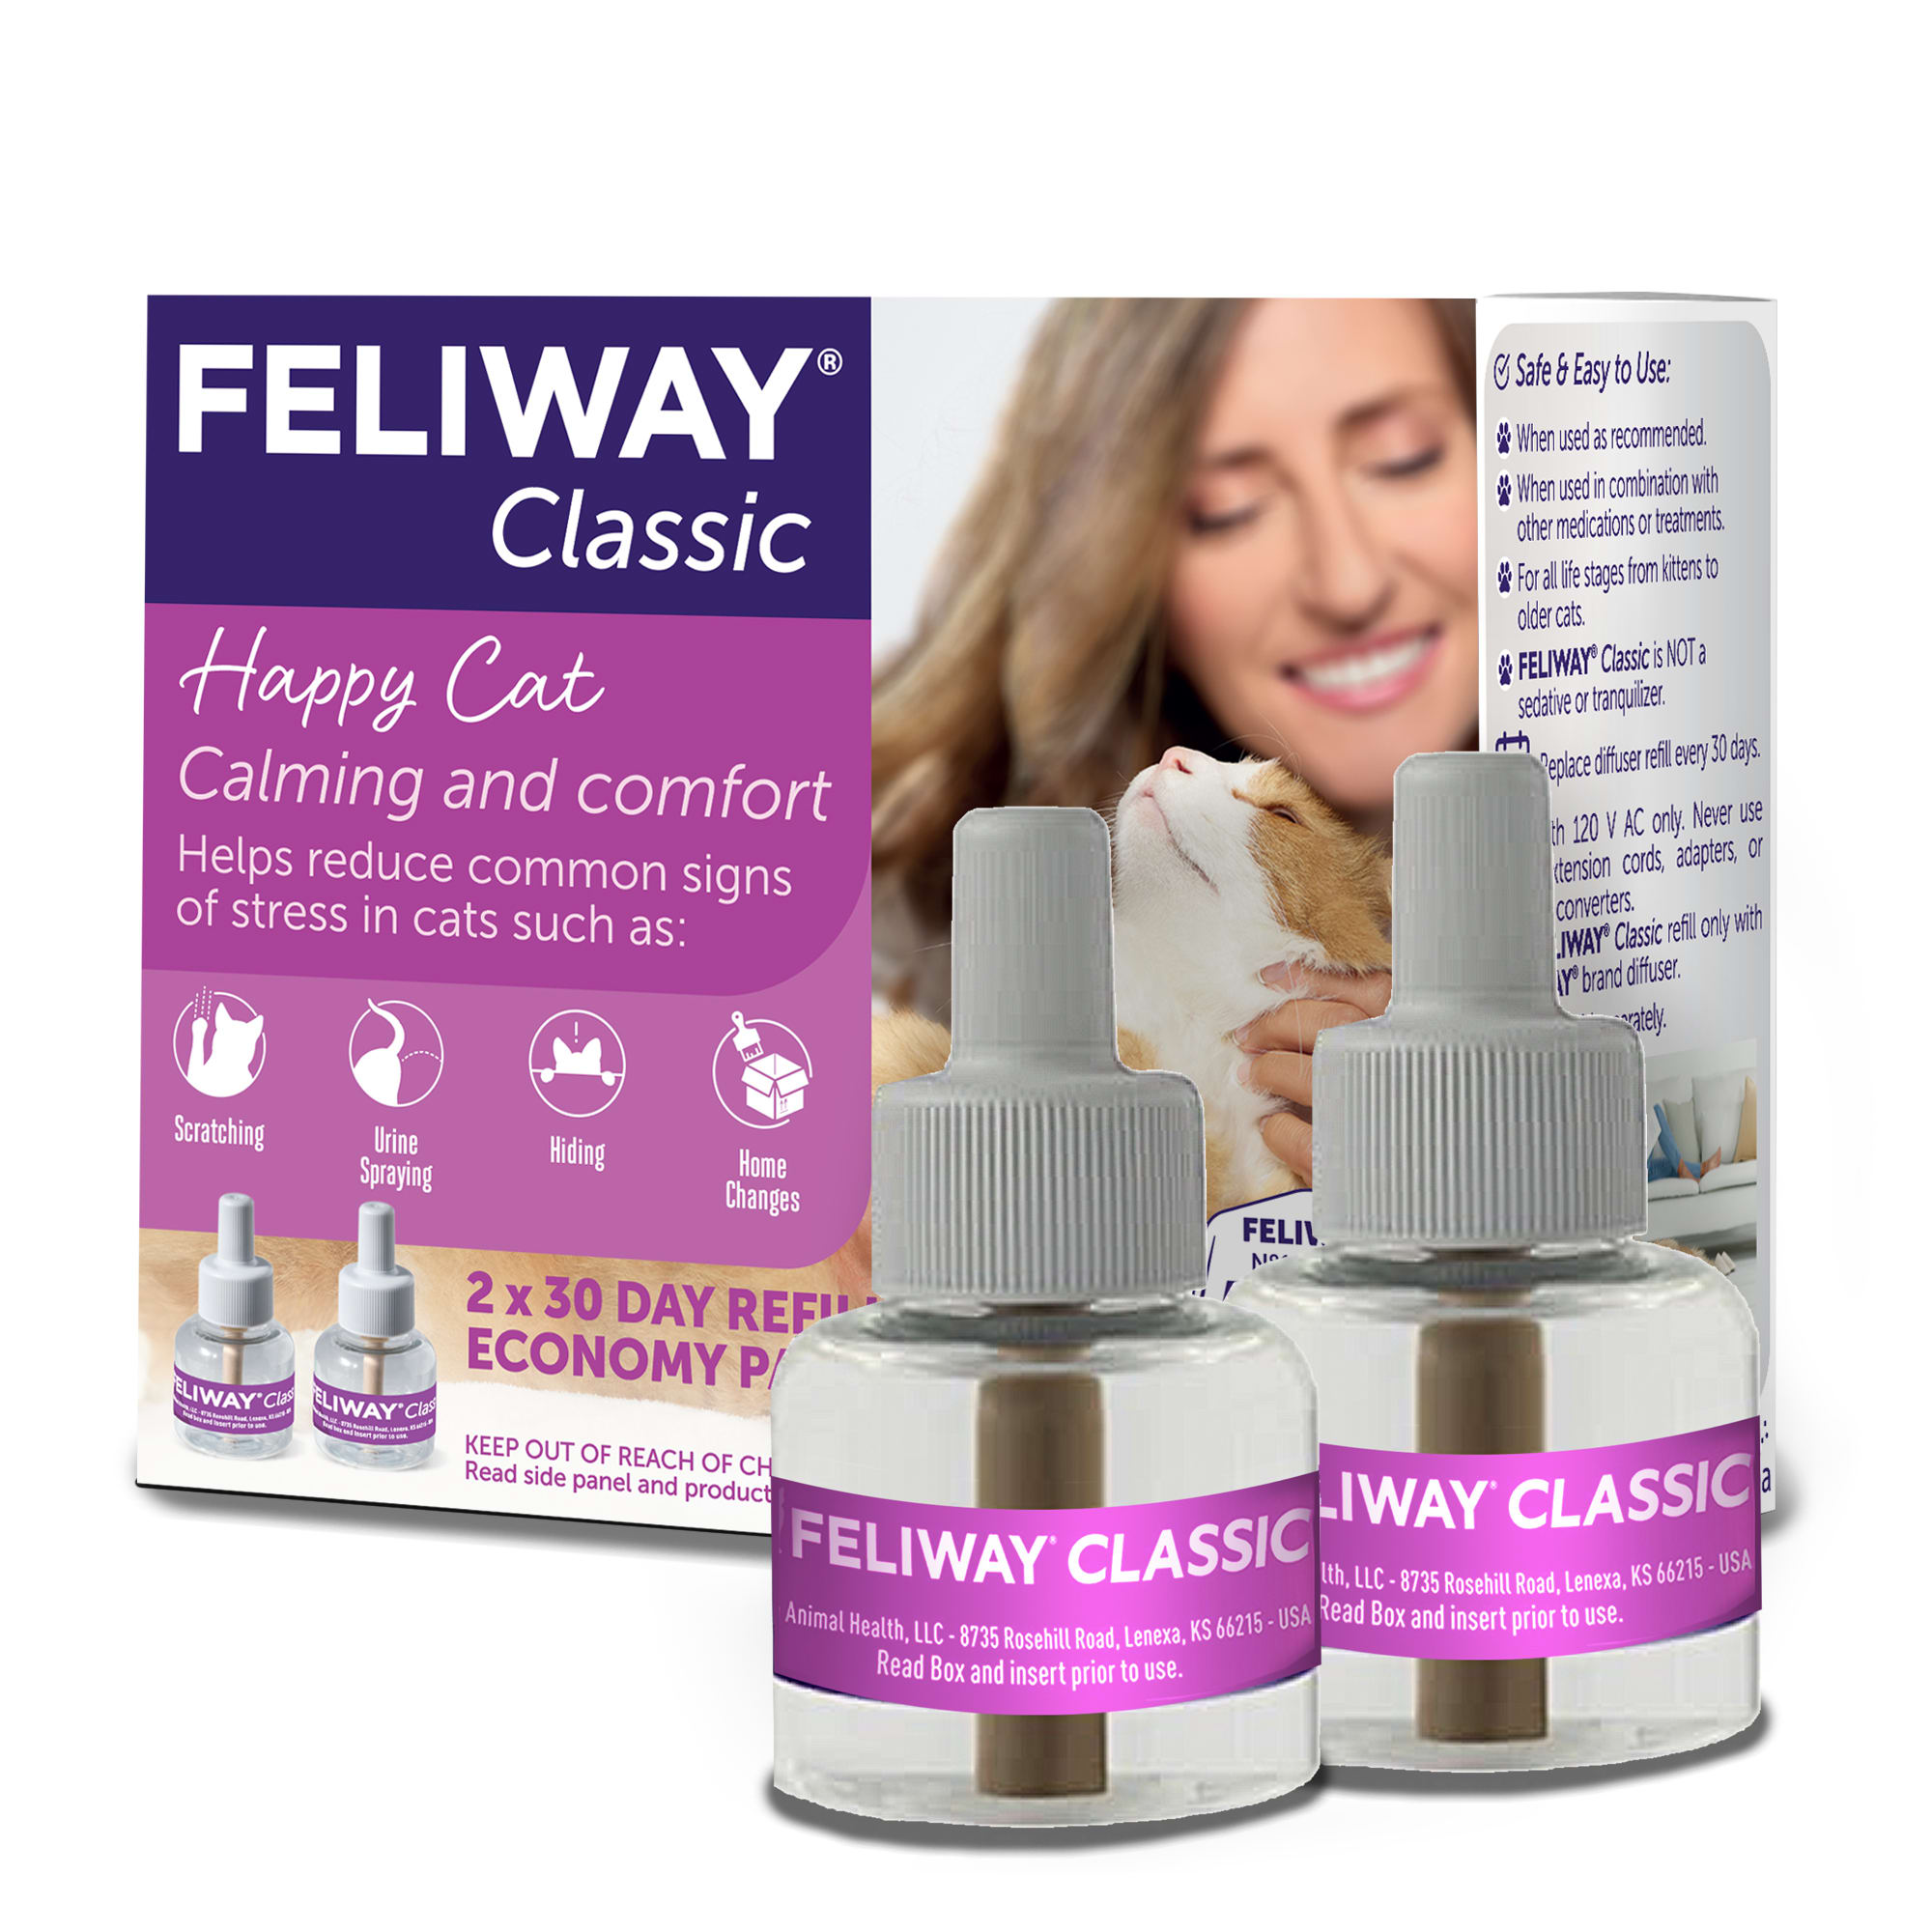 feliway for anxious cats